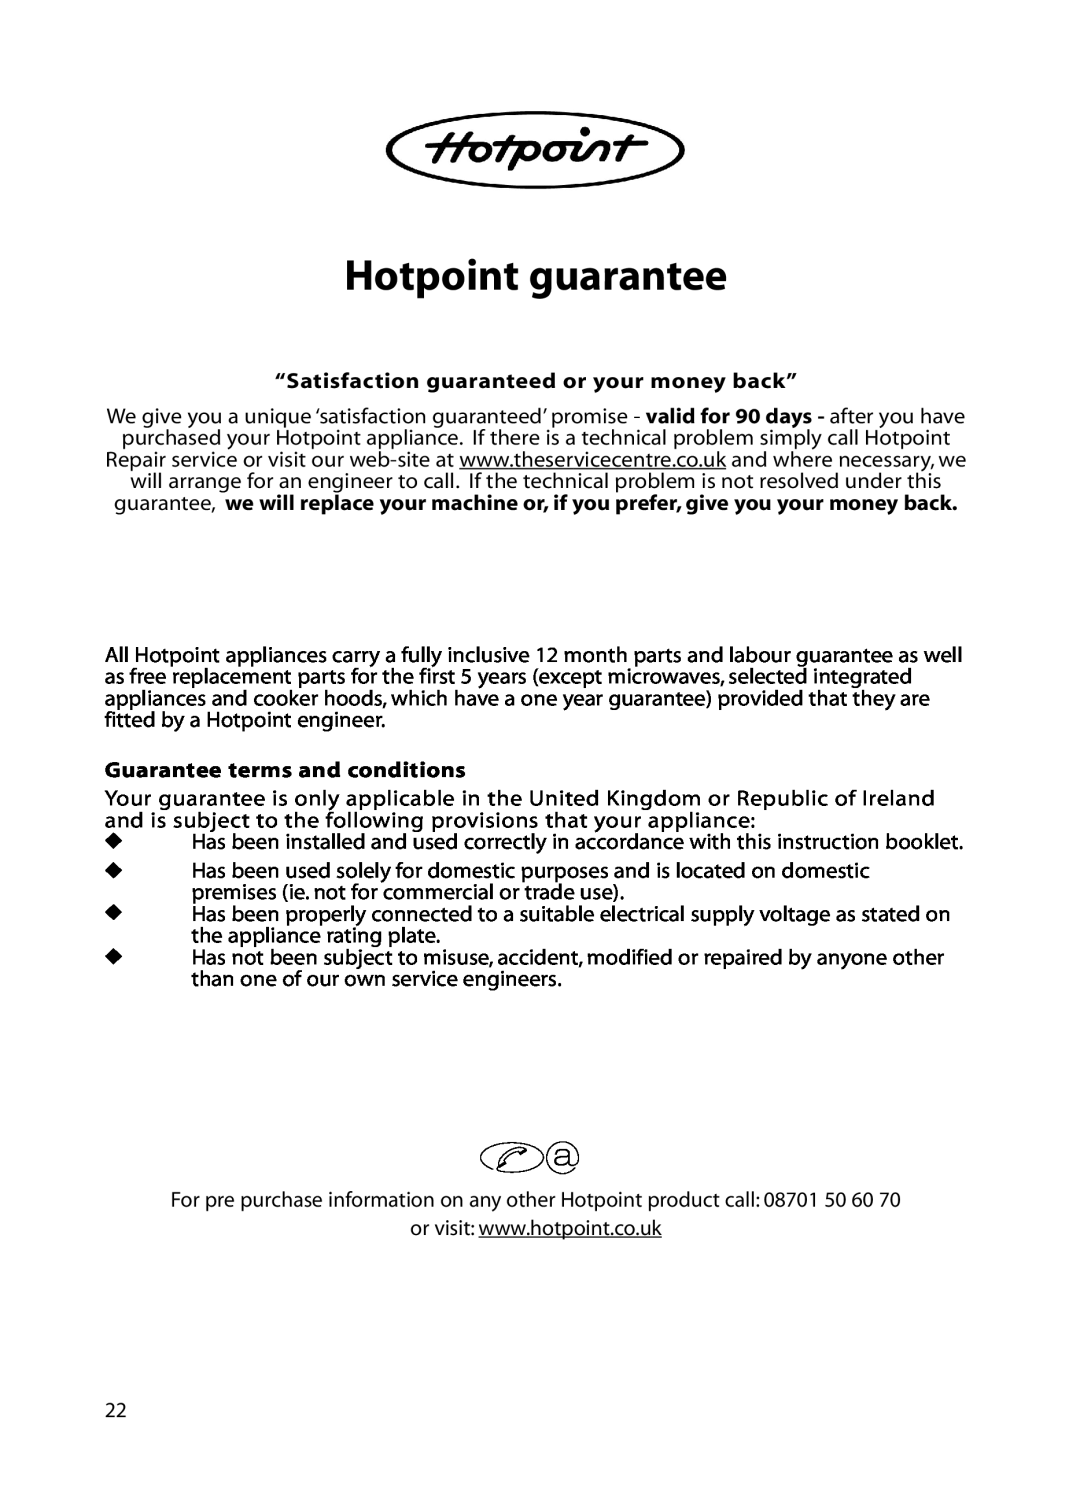 Hotpoint BE72 manual Hotpoint guarantee, “Satisfaction guaranteed or your money back”, Guarantee terms and conditions 